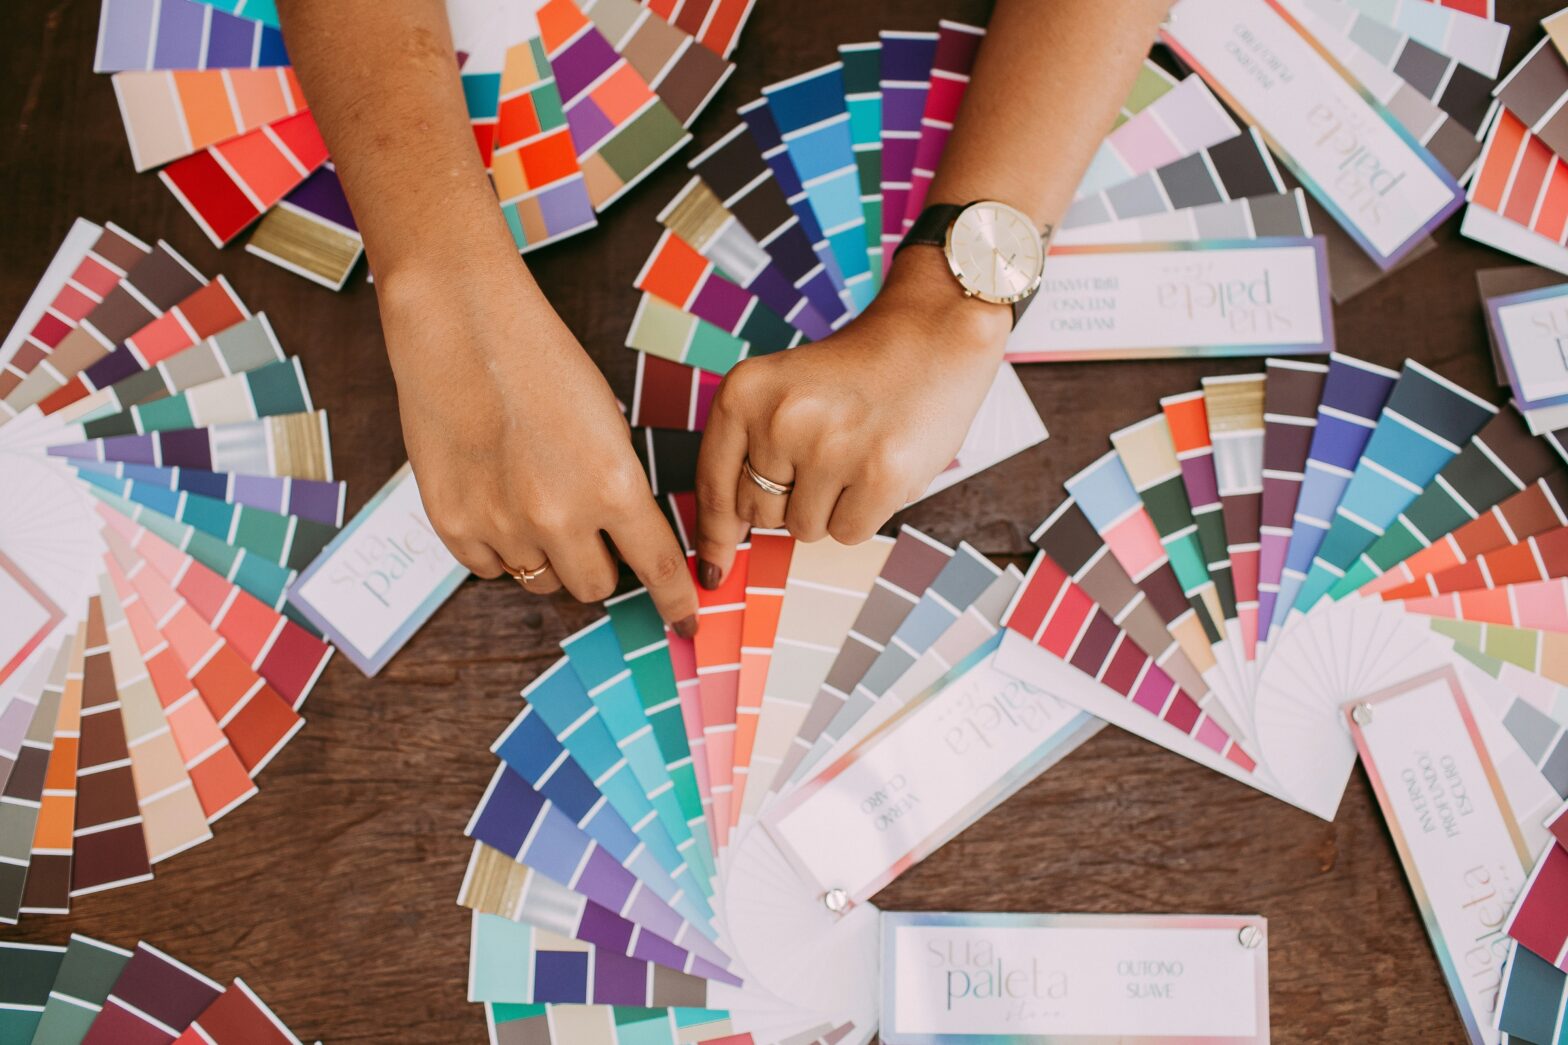 Hands choosing swatches from Pantone books